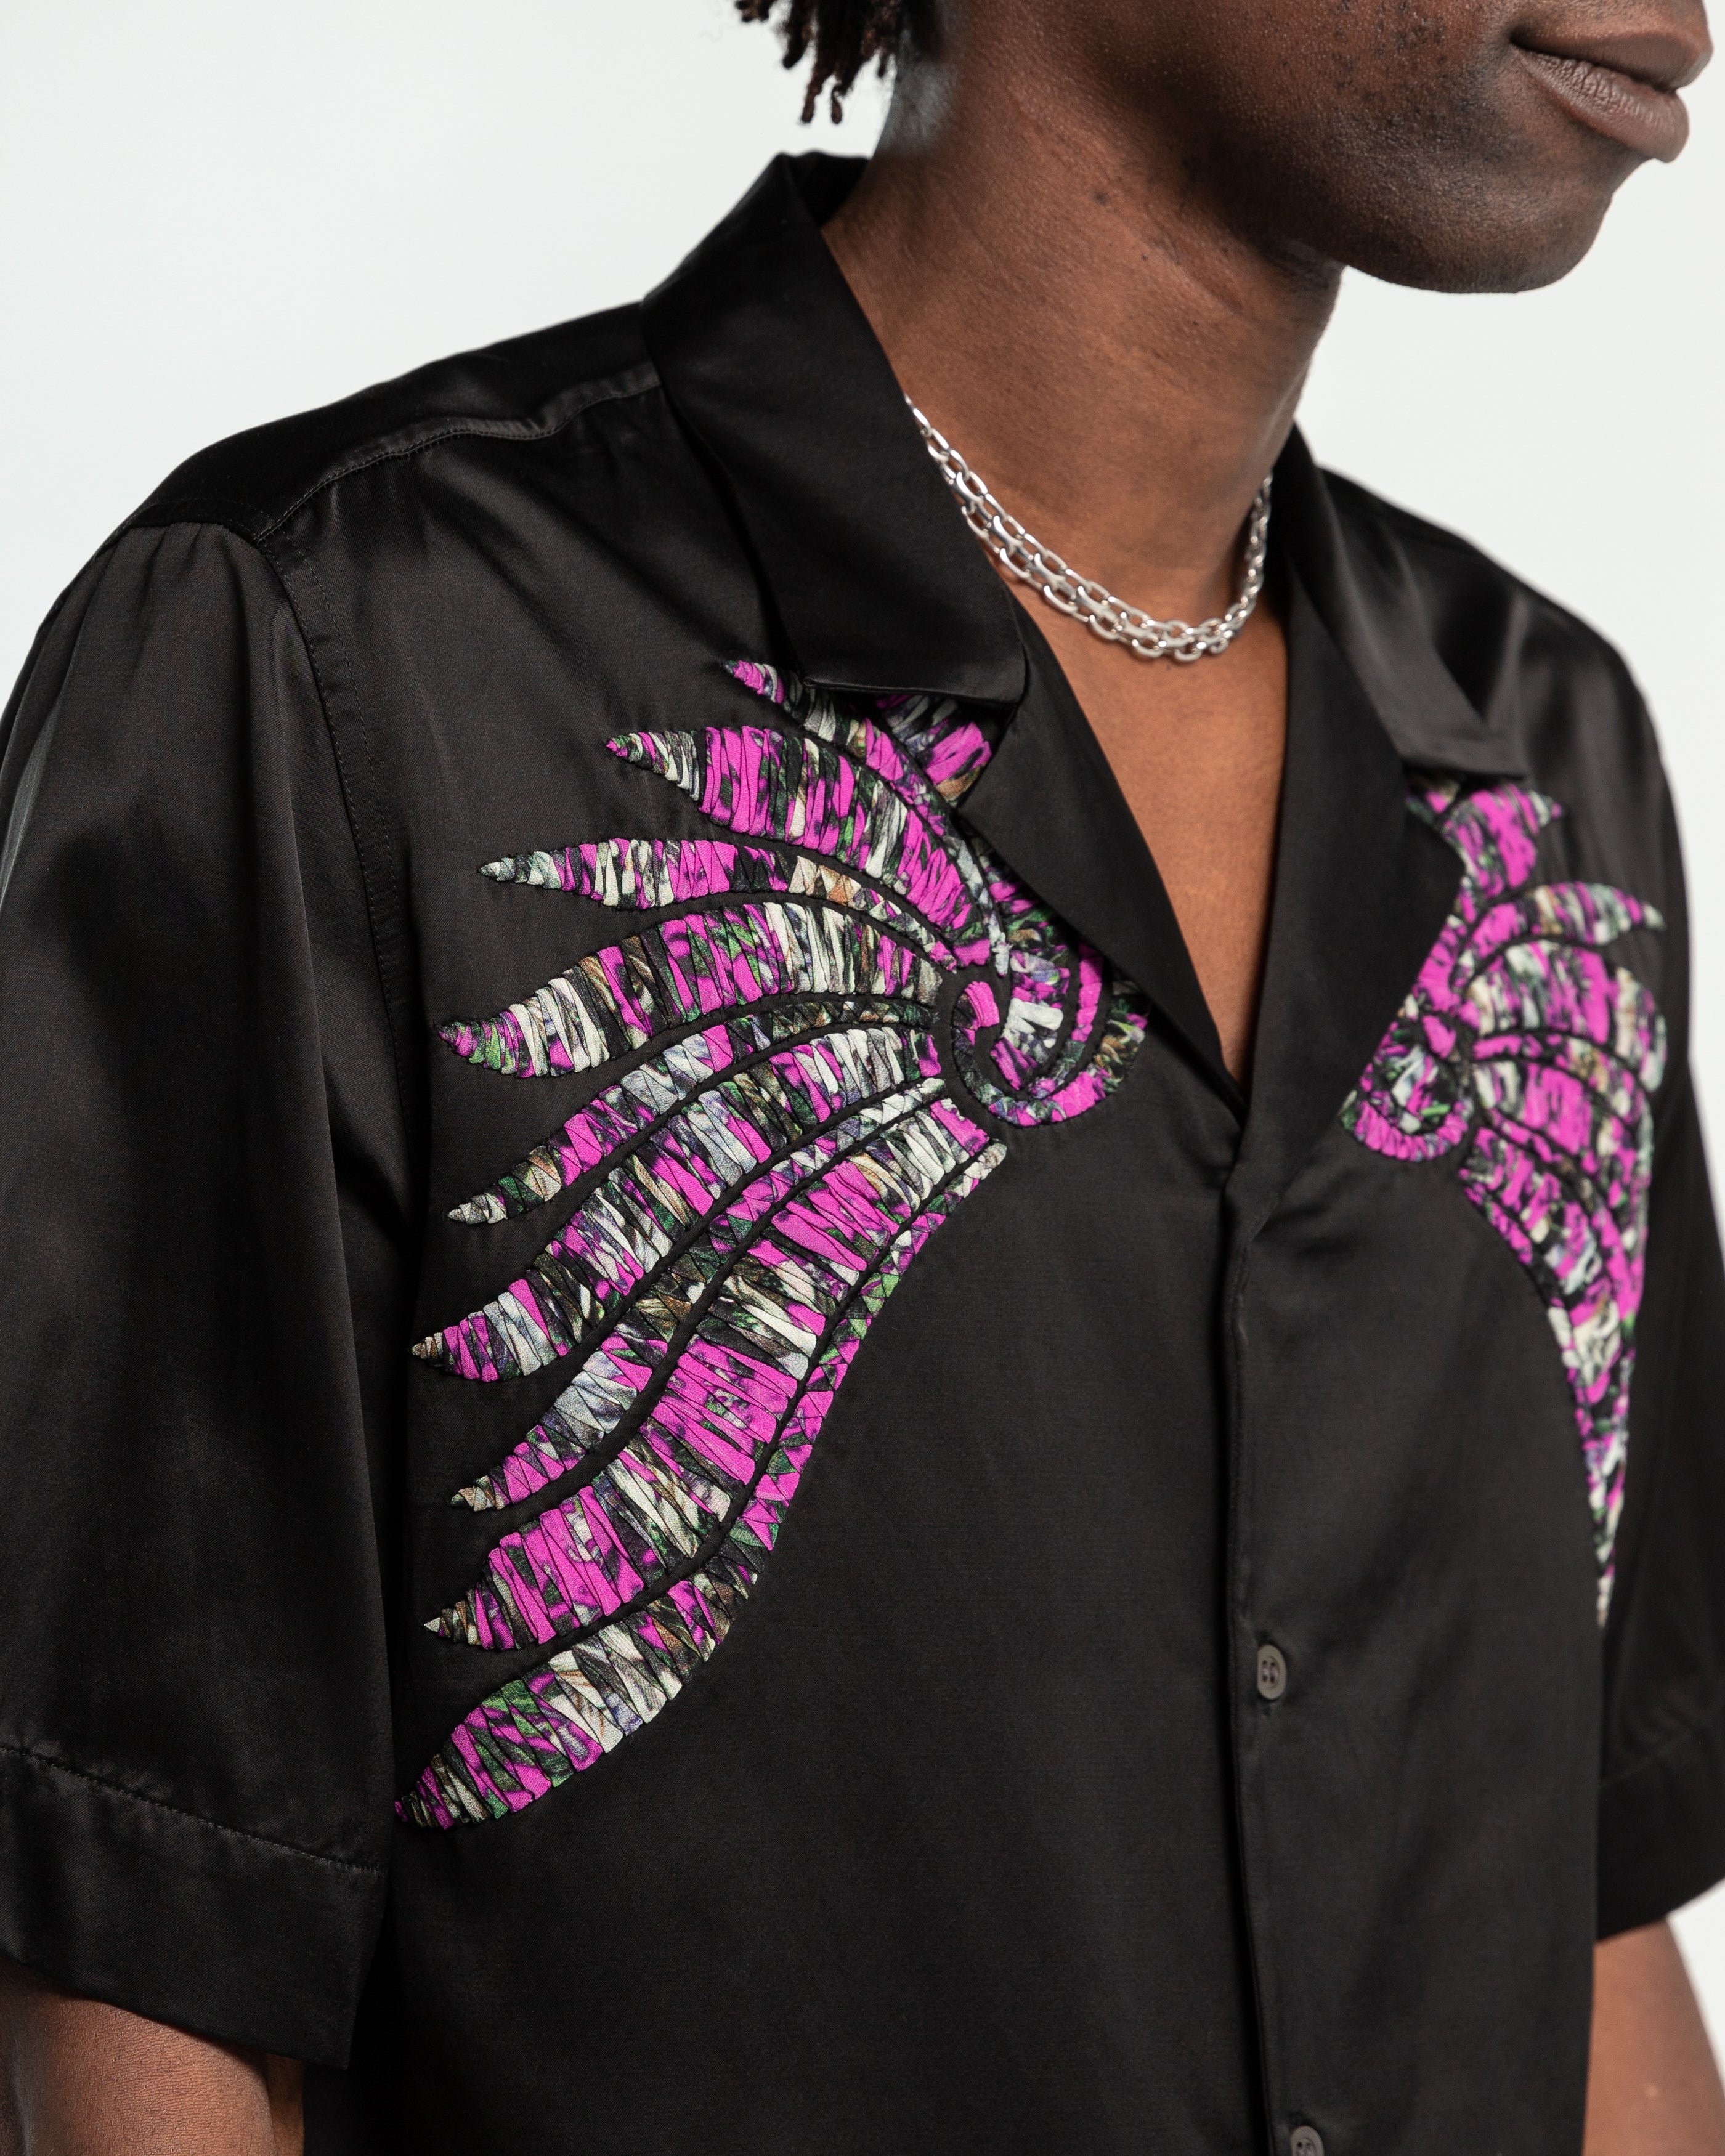 Carltone Embroidered Shirt in Black